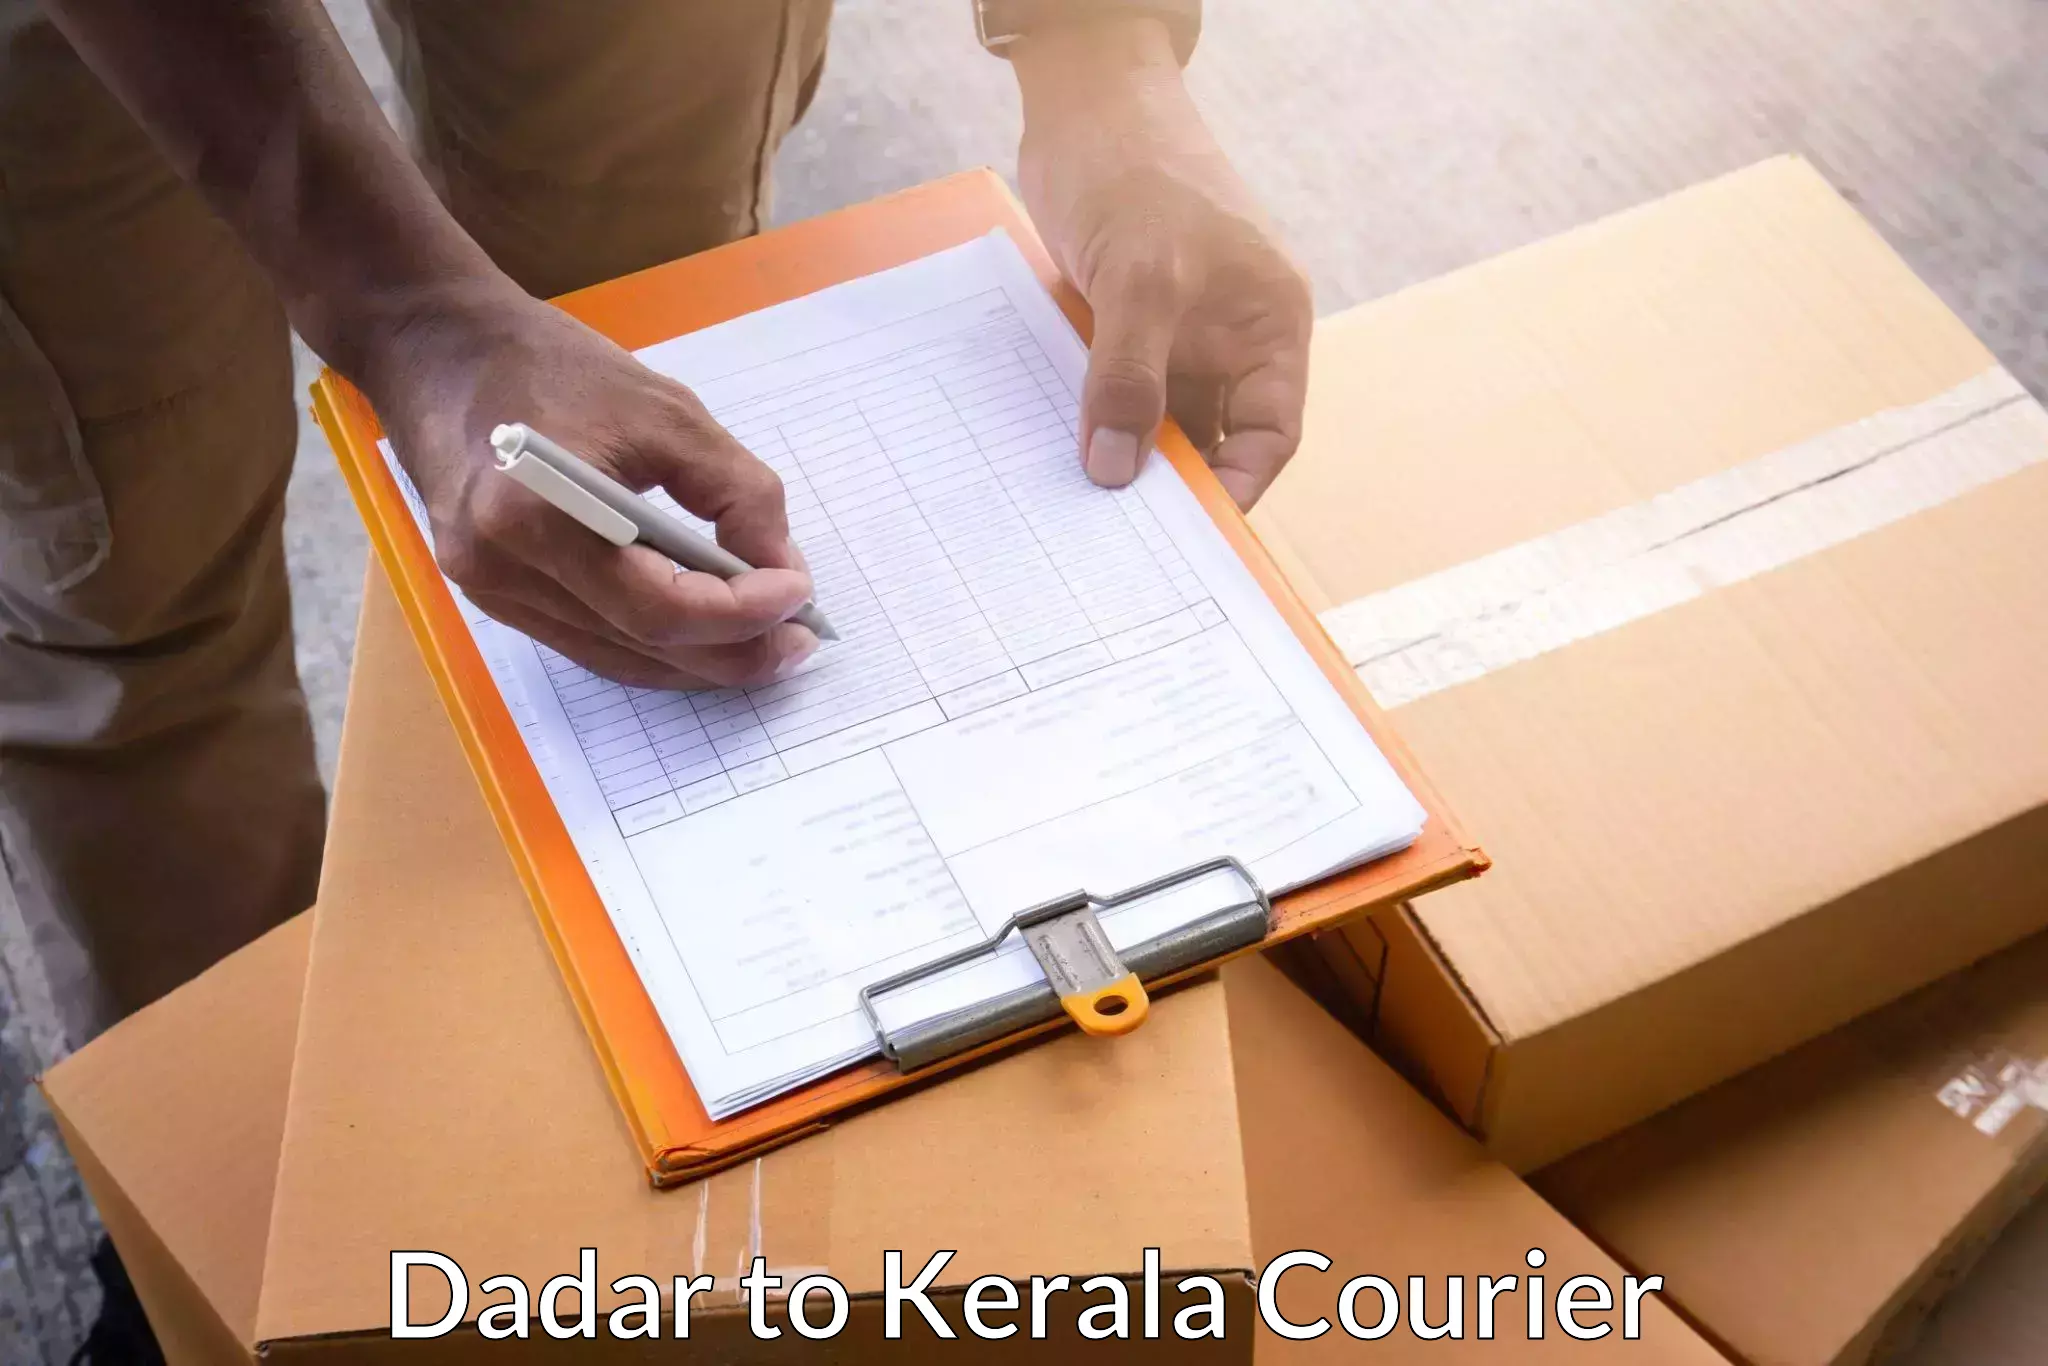 Courier service partnerships Dadar to Allepey